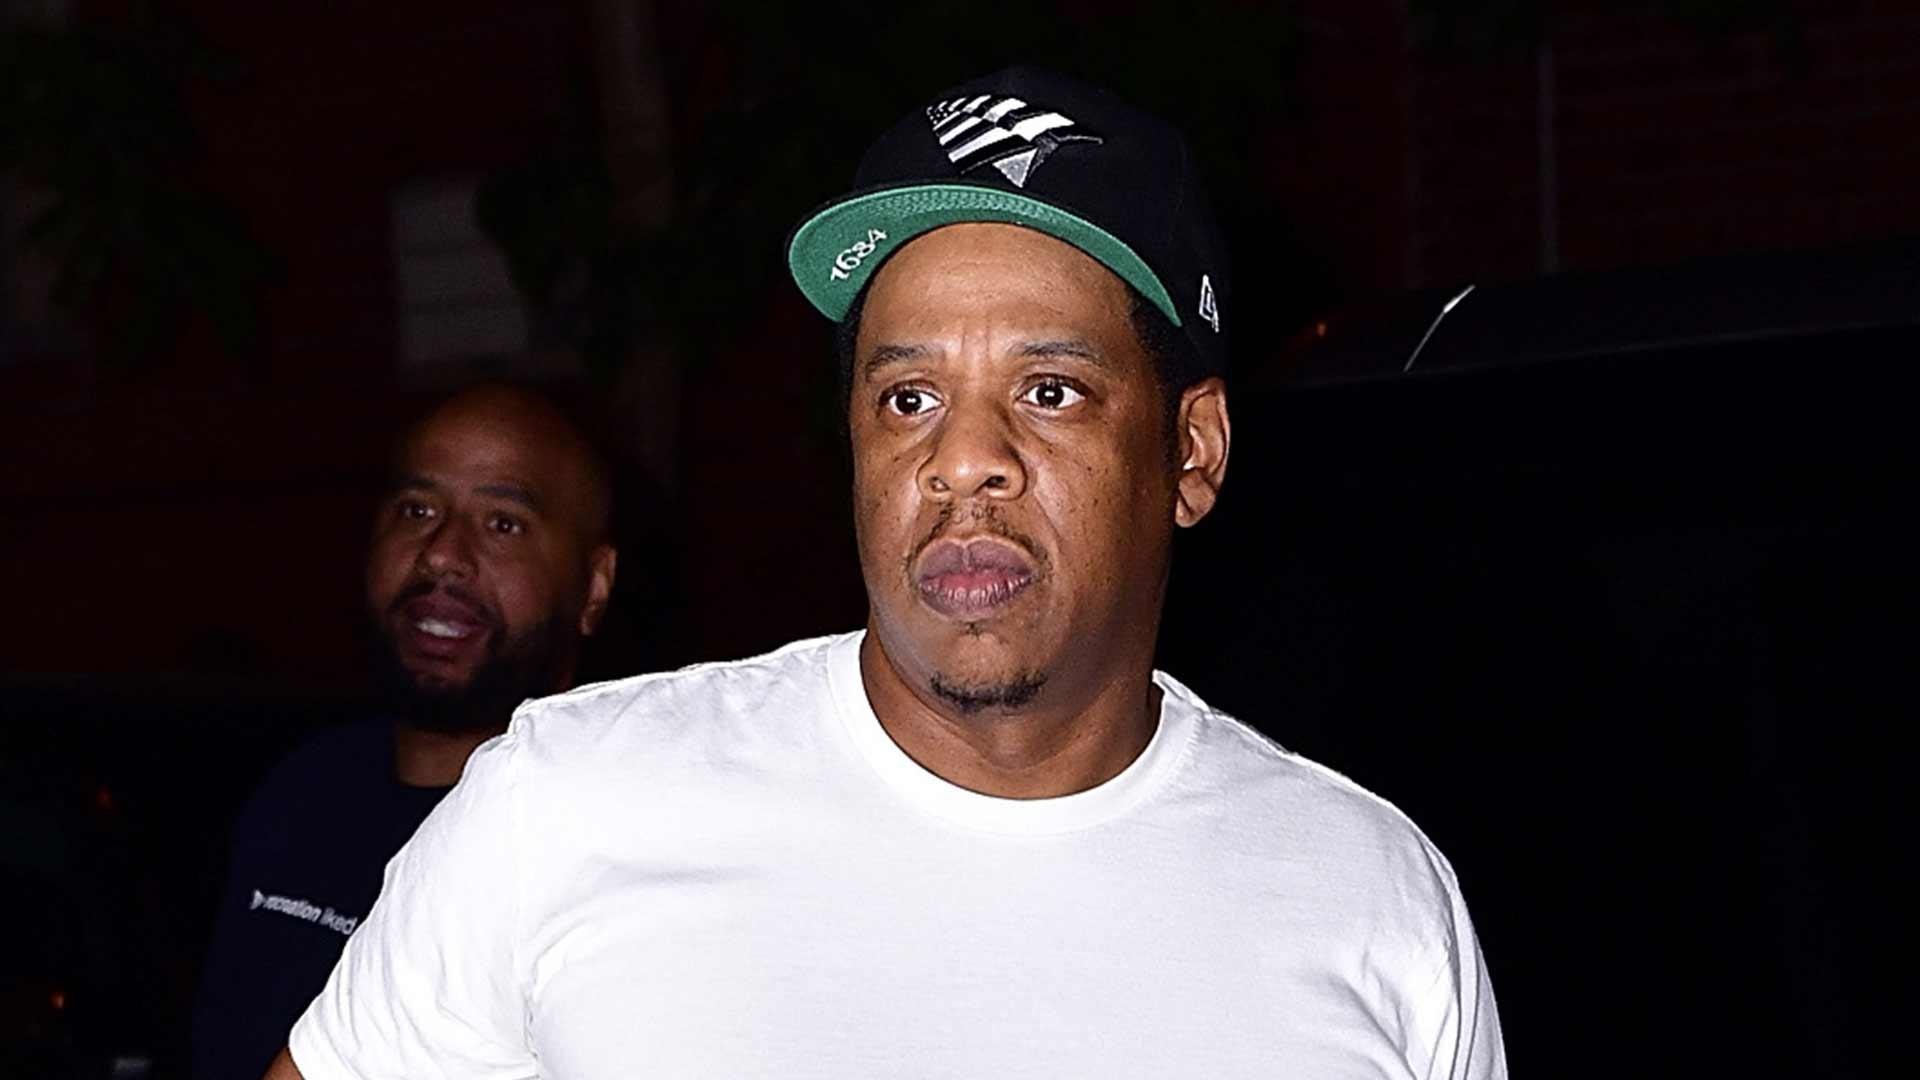 Jay-Z’s Team ROC Provide Legal Gun to Phoenix Family to Press Charges Against Police Officer for Child Neglect